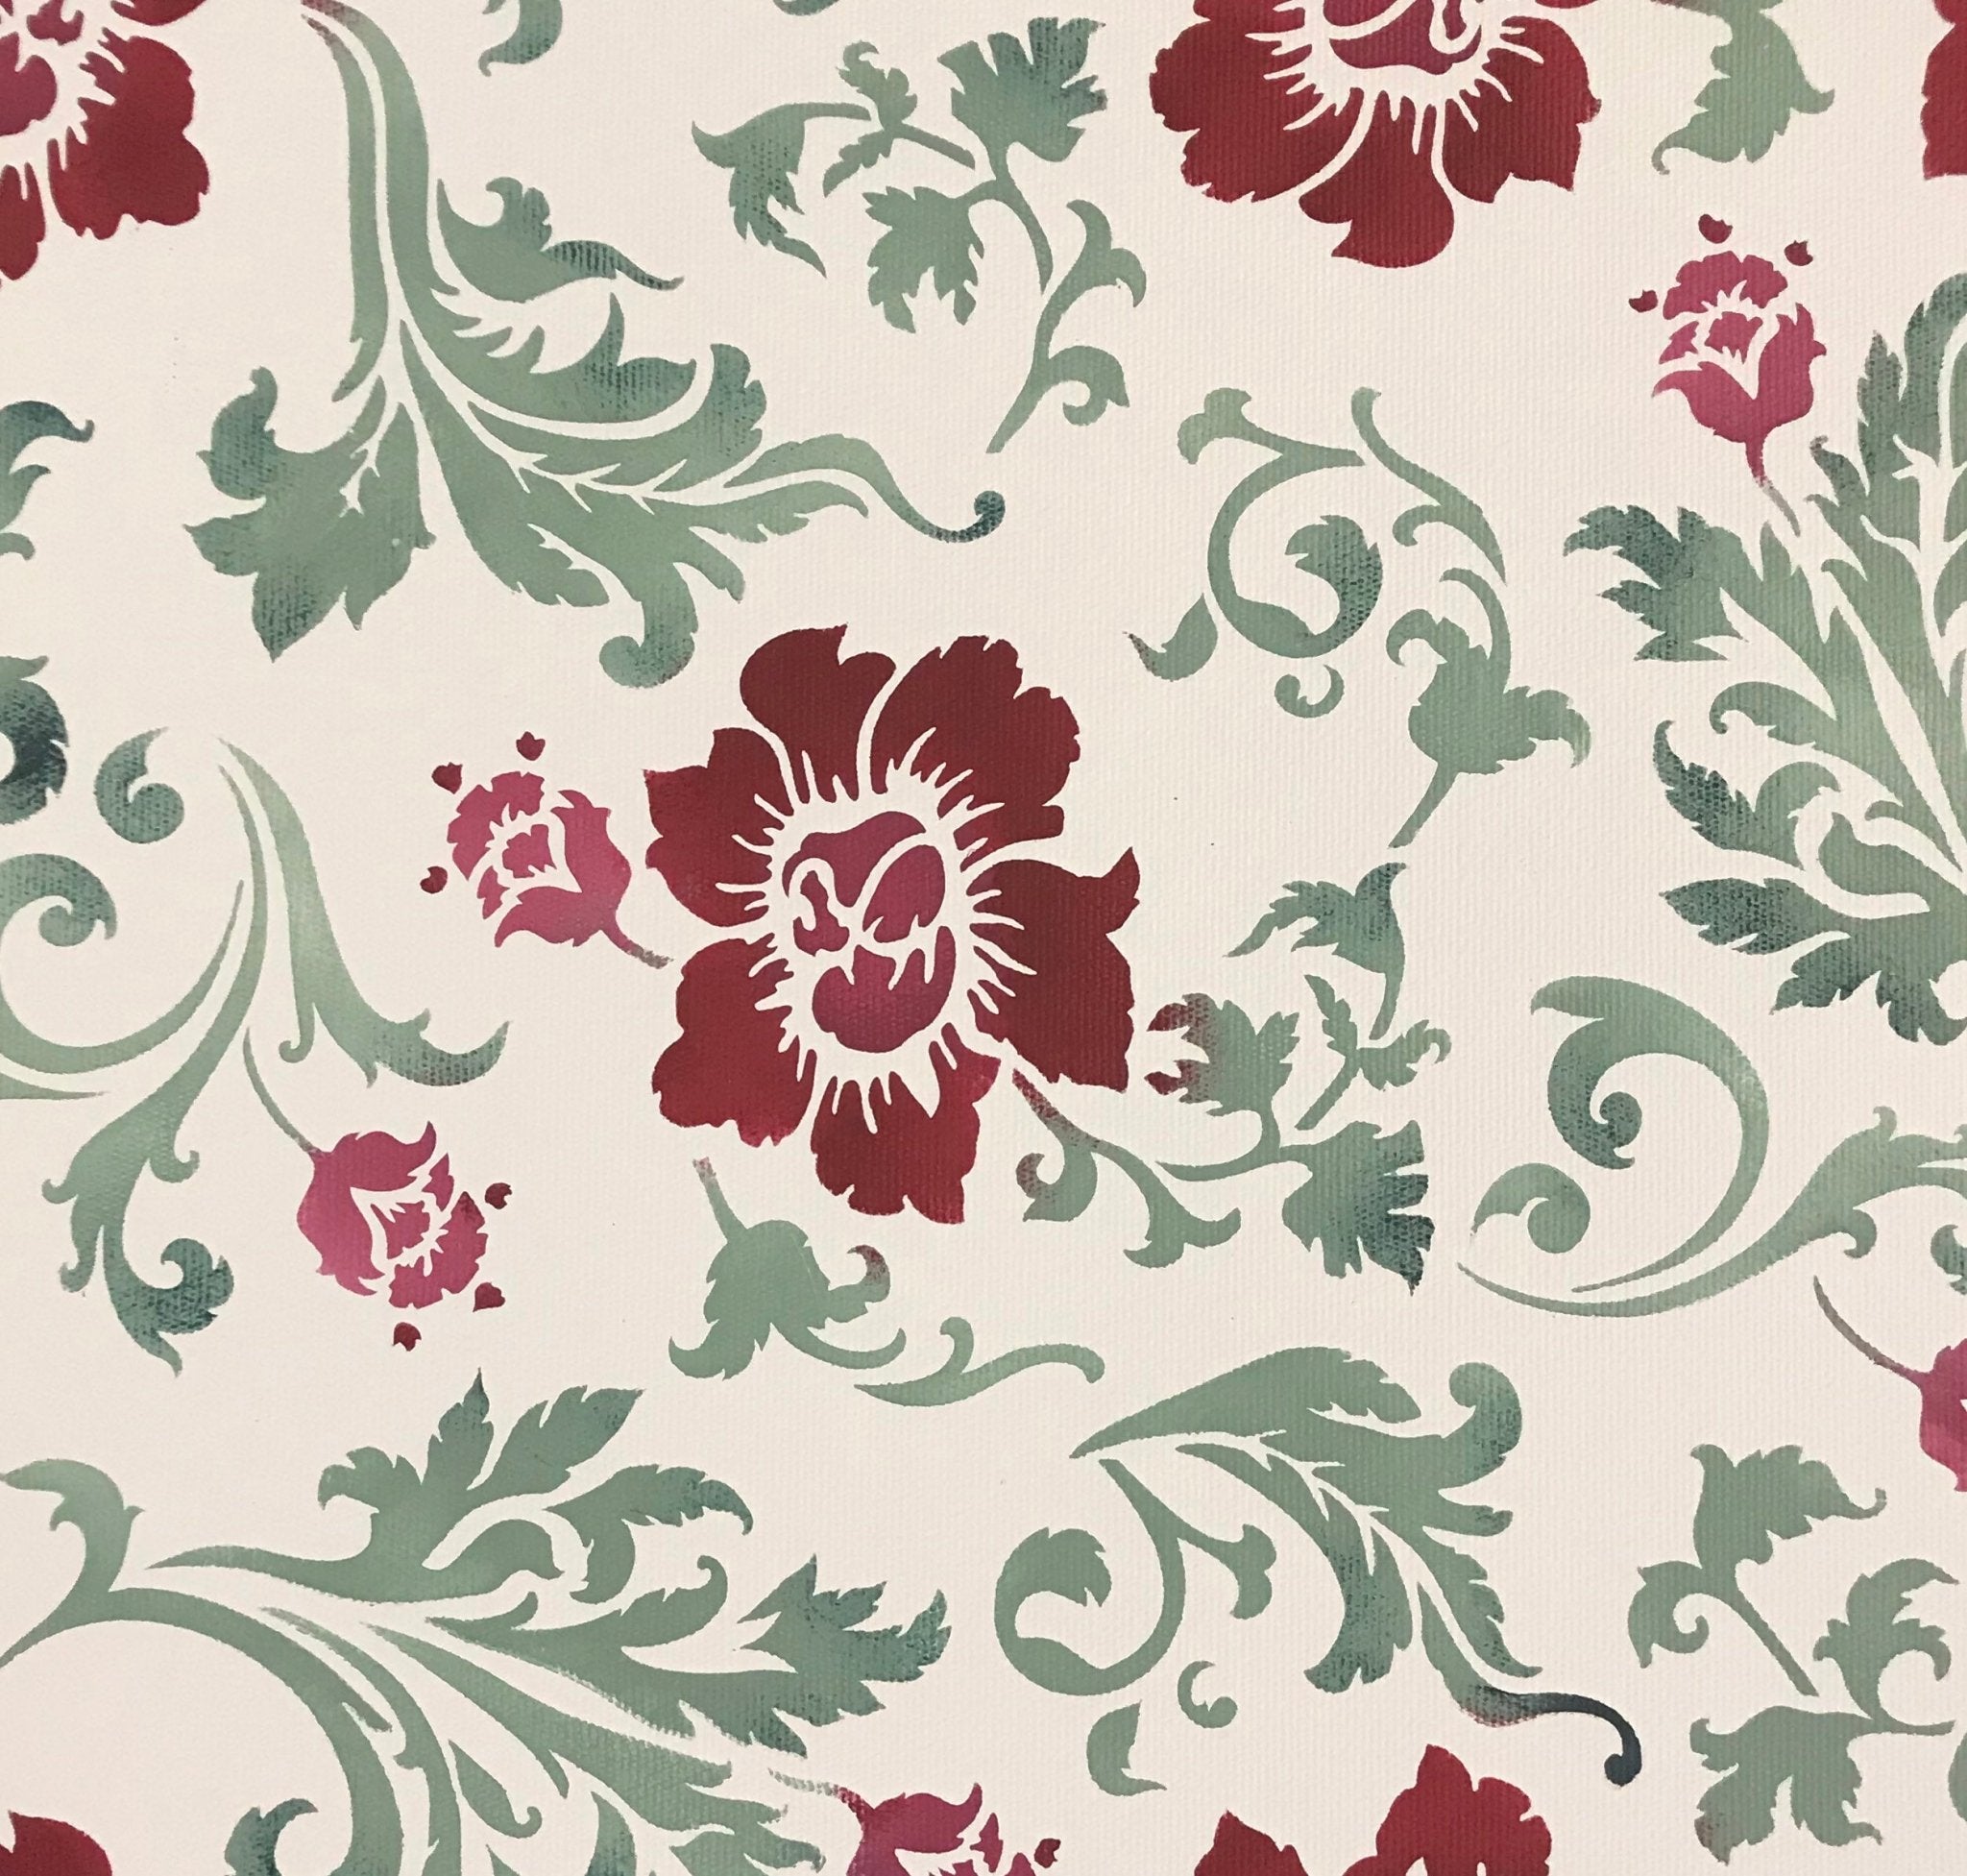 Close up of motifs in Wild Roses #3 floorcloth.